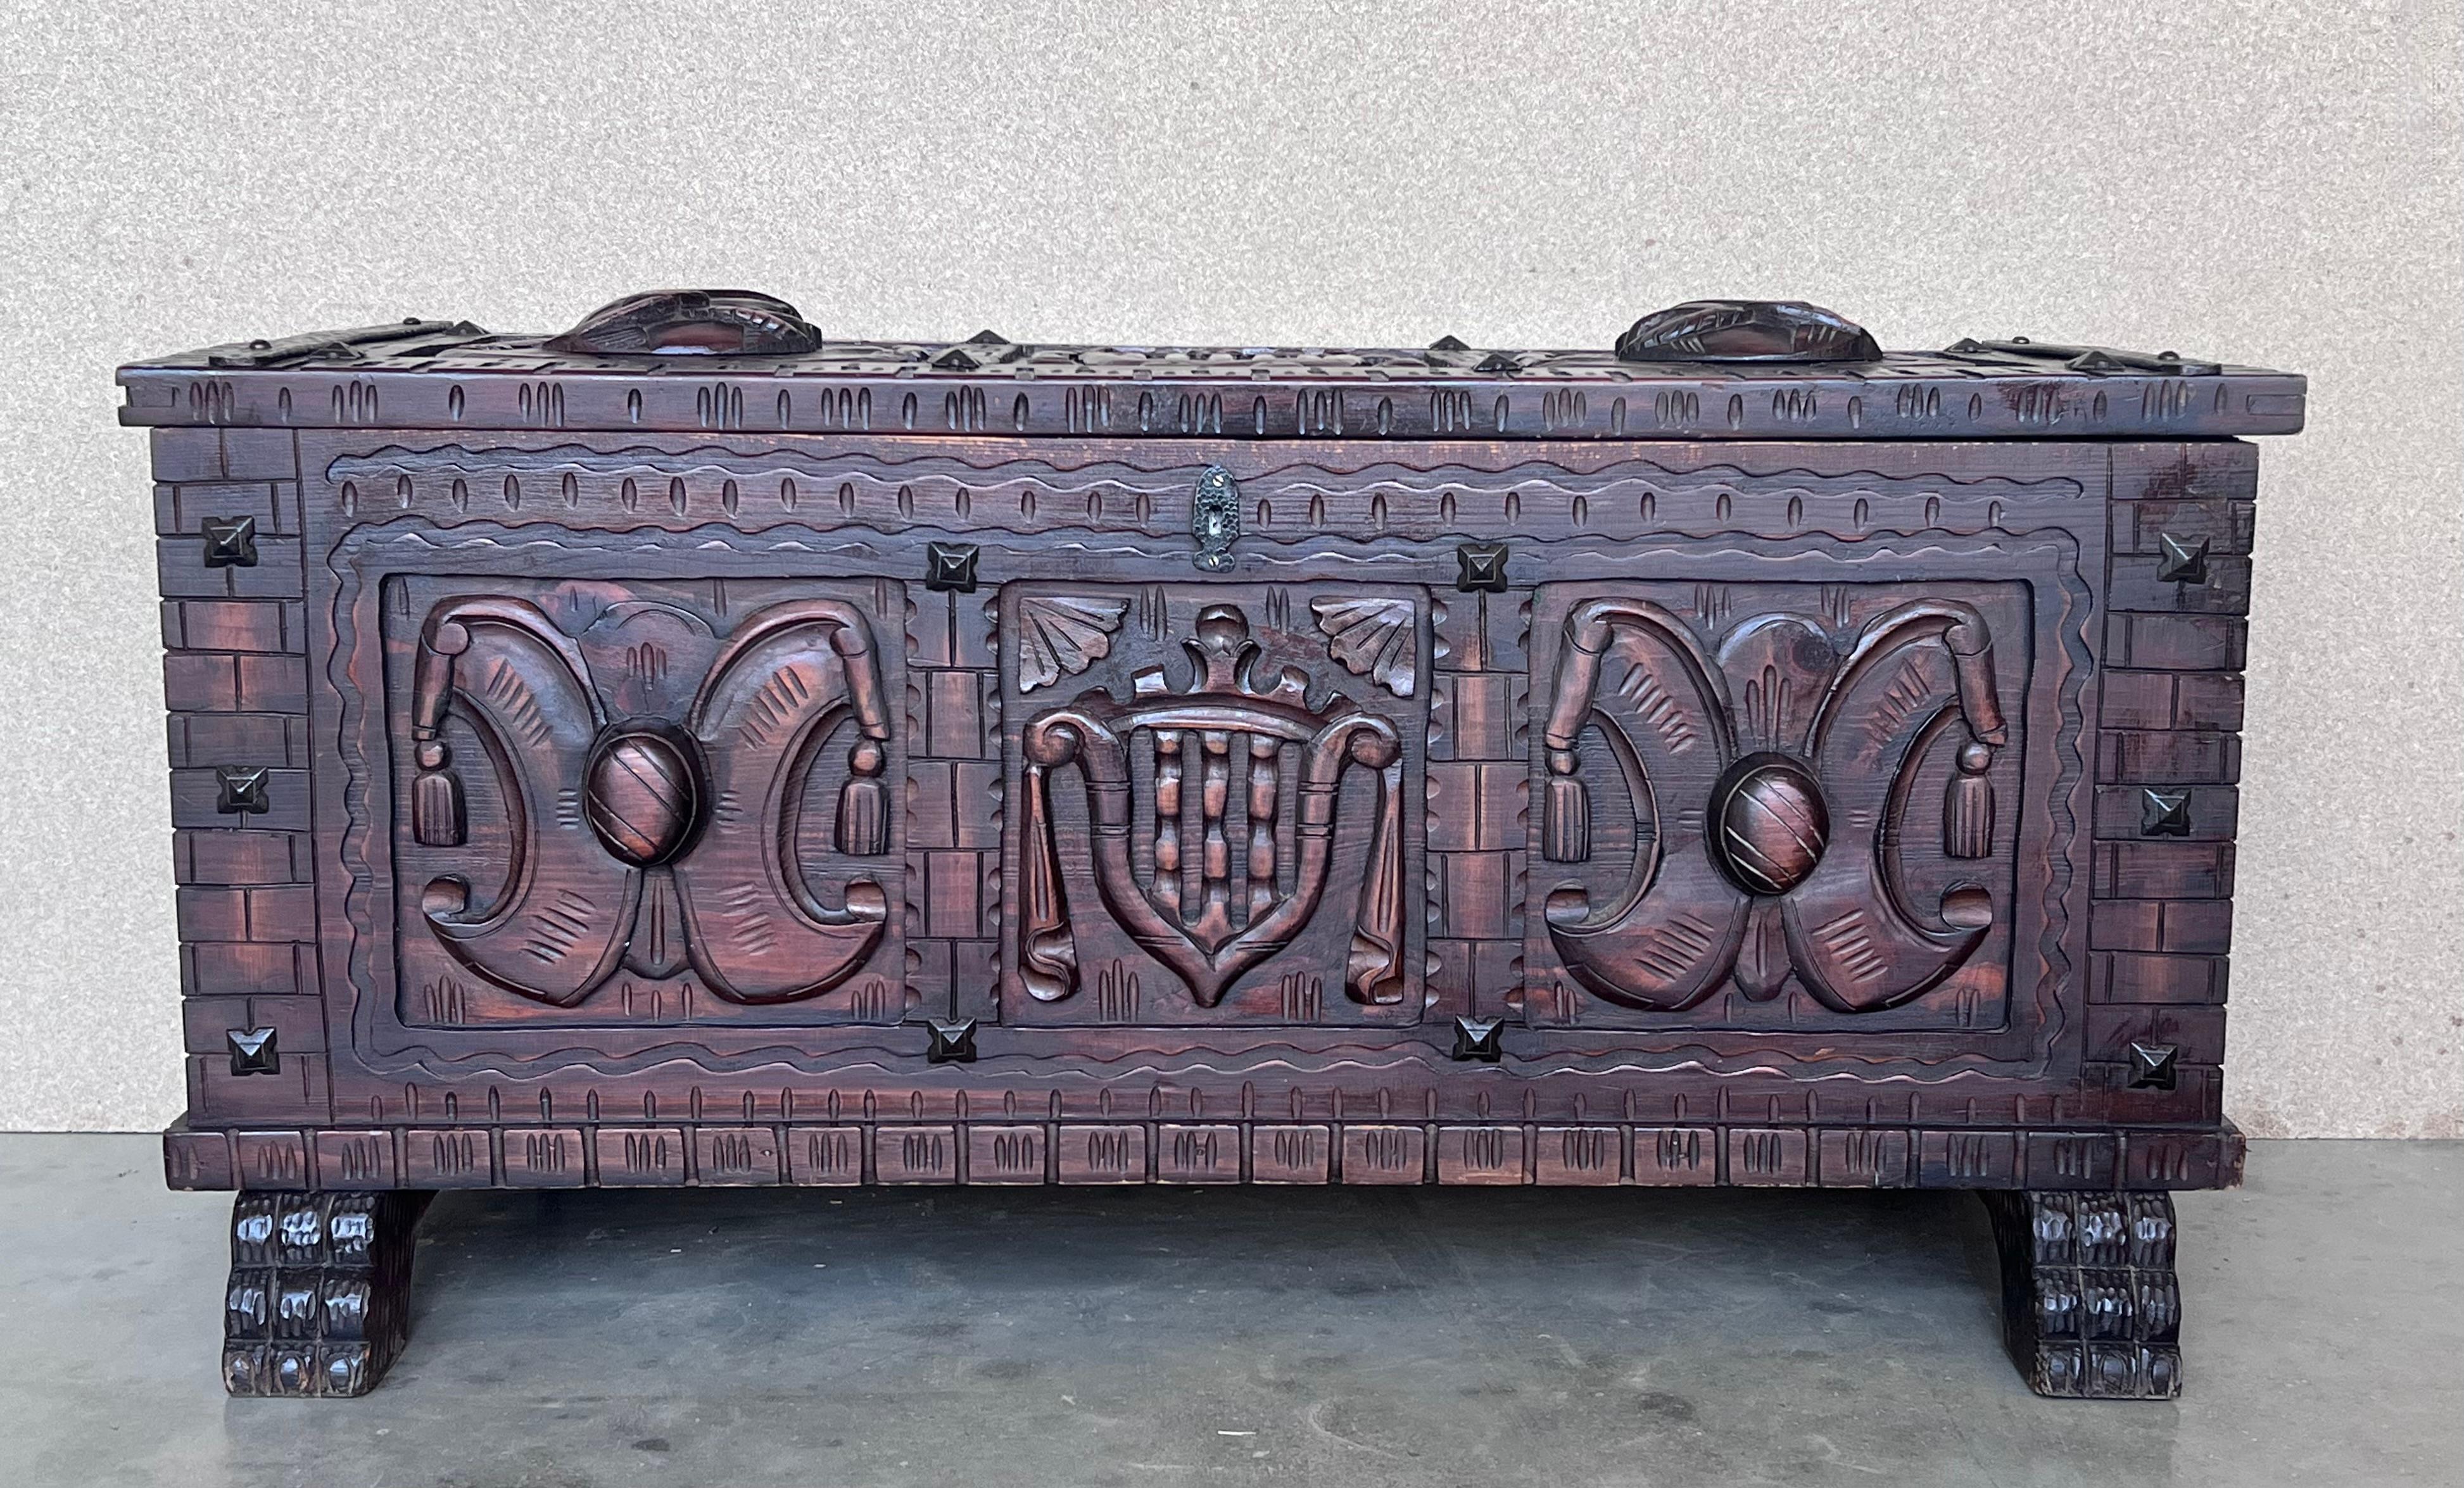 Nice 19th century chest in walnut. Hand carved facade panel with heads decorations. Plinth with brace decorations, dovetail assembly with wrought iron wardware.
Add a real show stopper to your interior with this extremely Spanish chest or coffer,